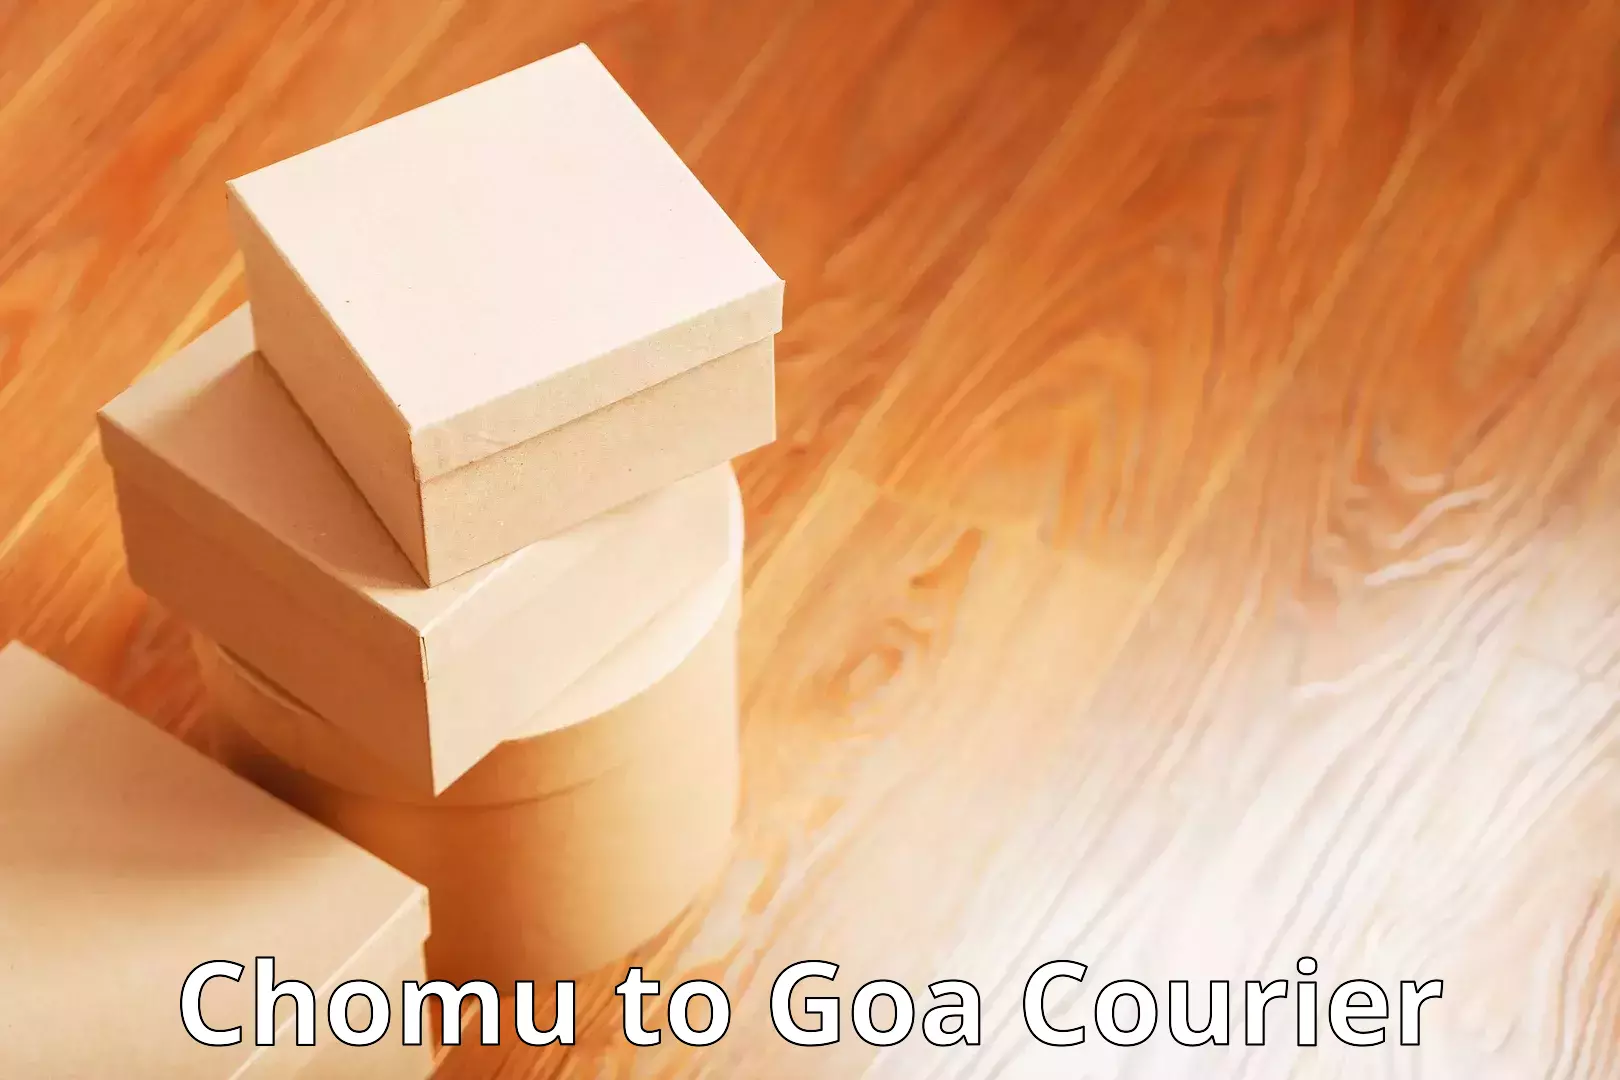 Automated parcel services Chomu to Goa